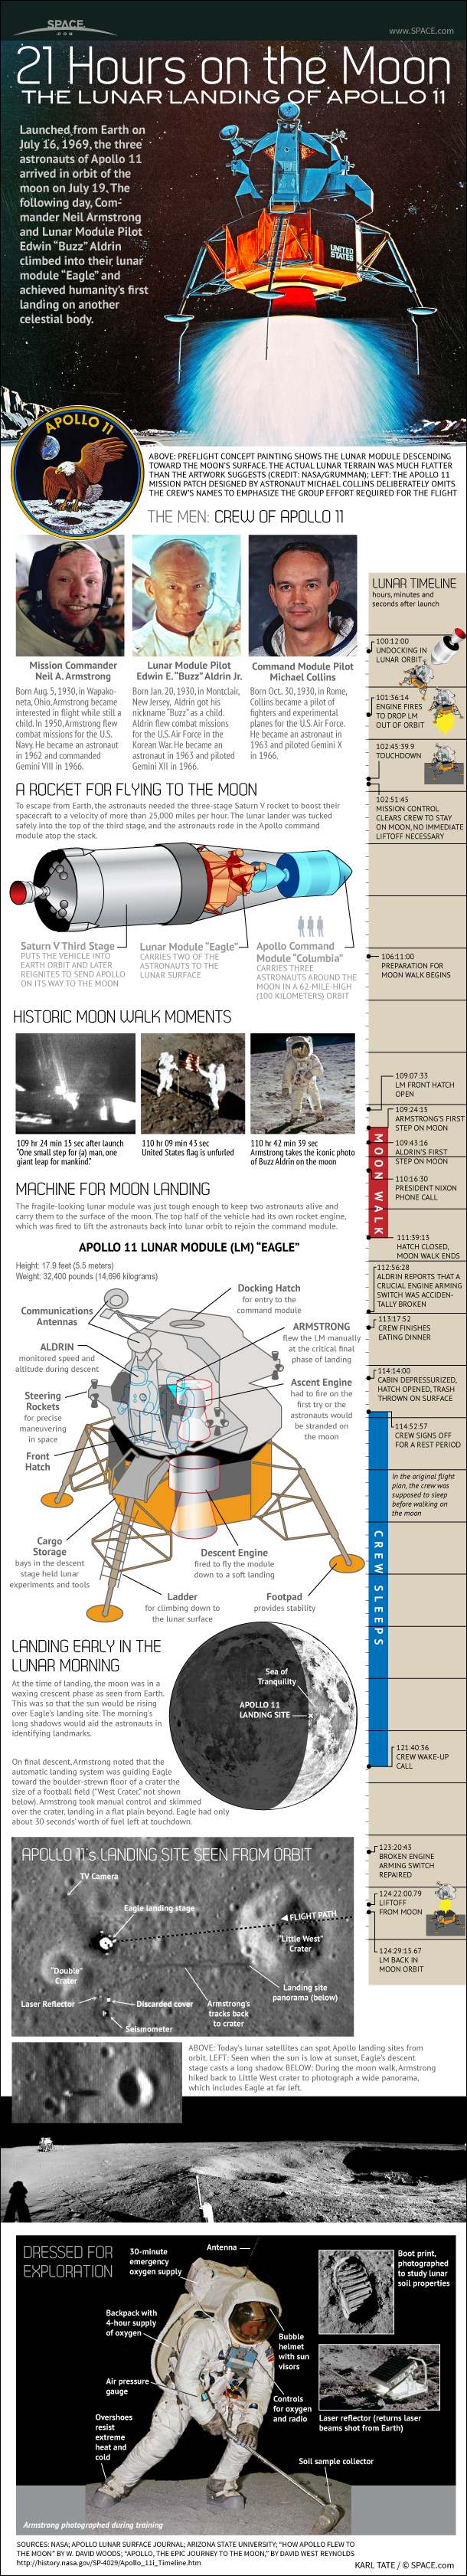 How many Apollo missions landed on the moon?